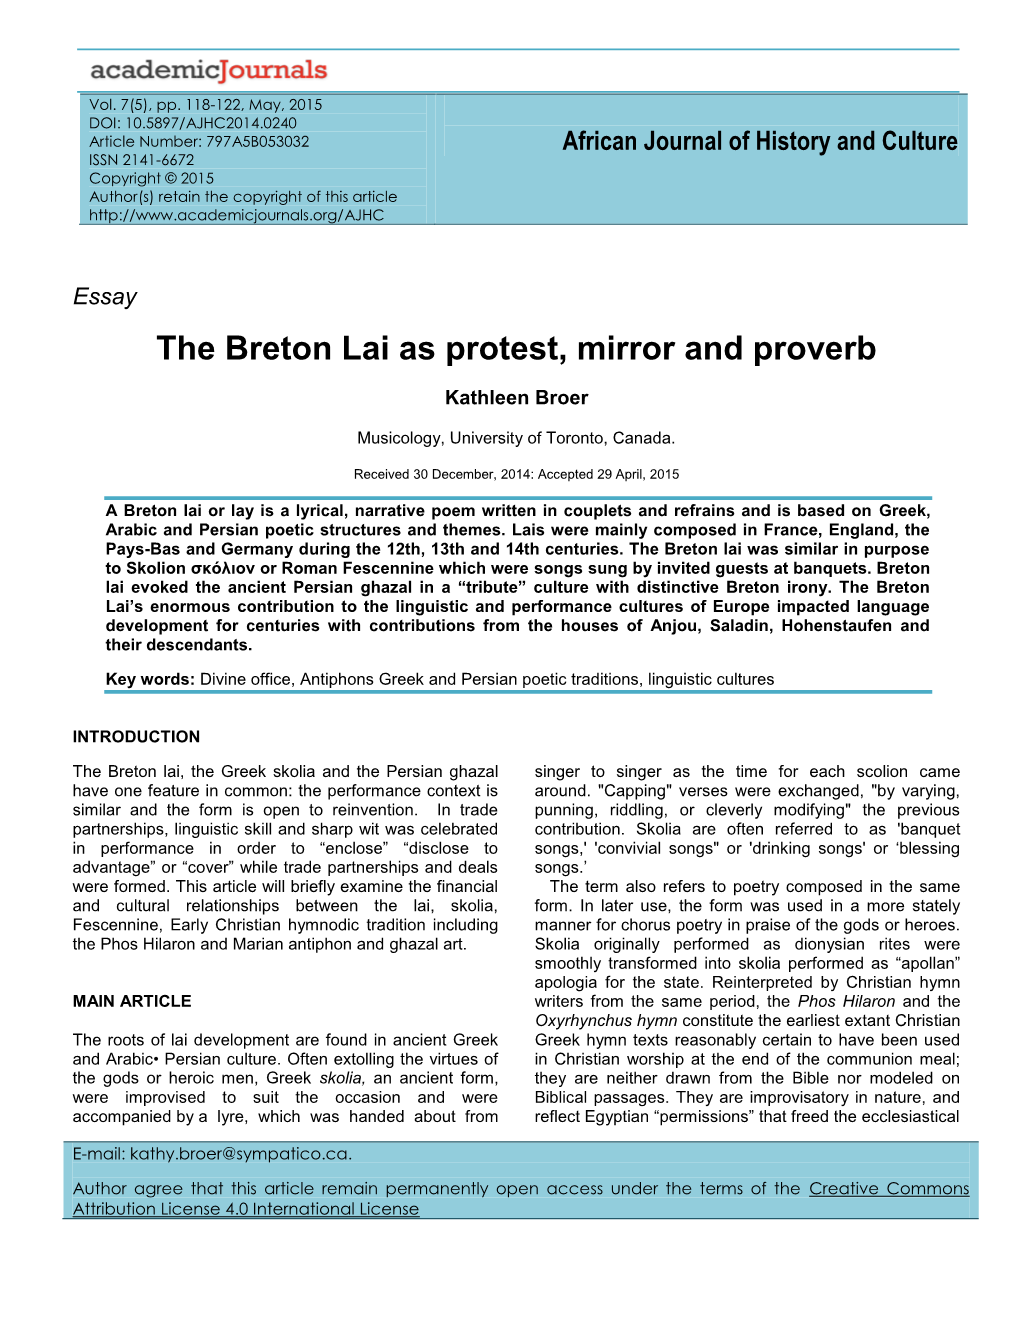 The Breton Lai As Protest, Mirror and Proverb